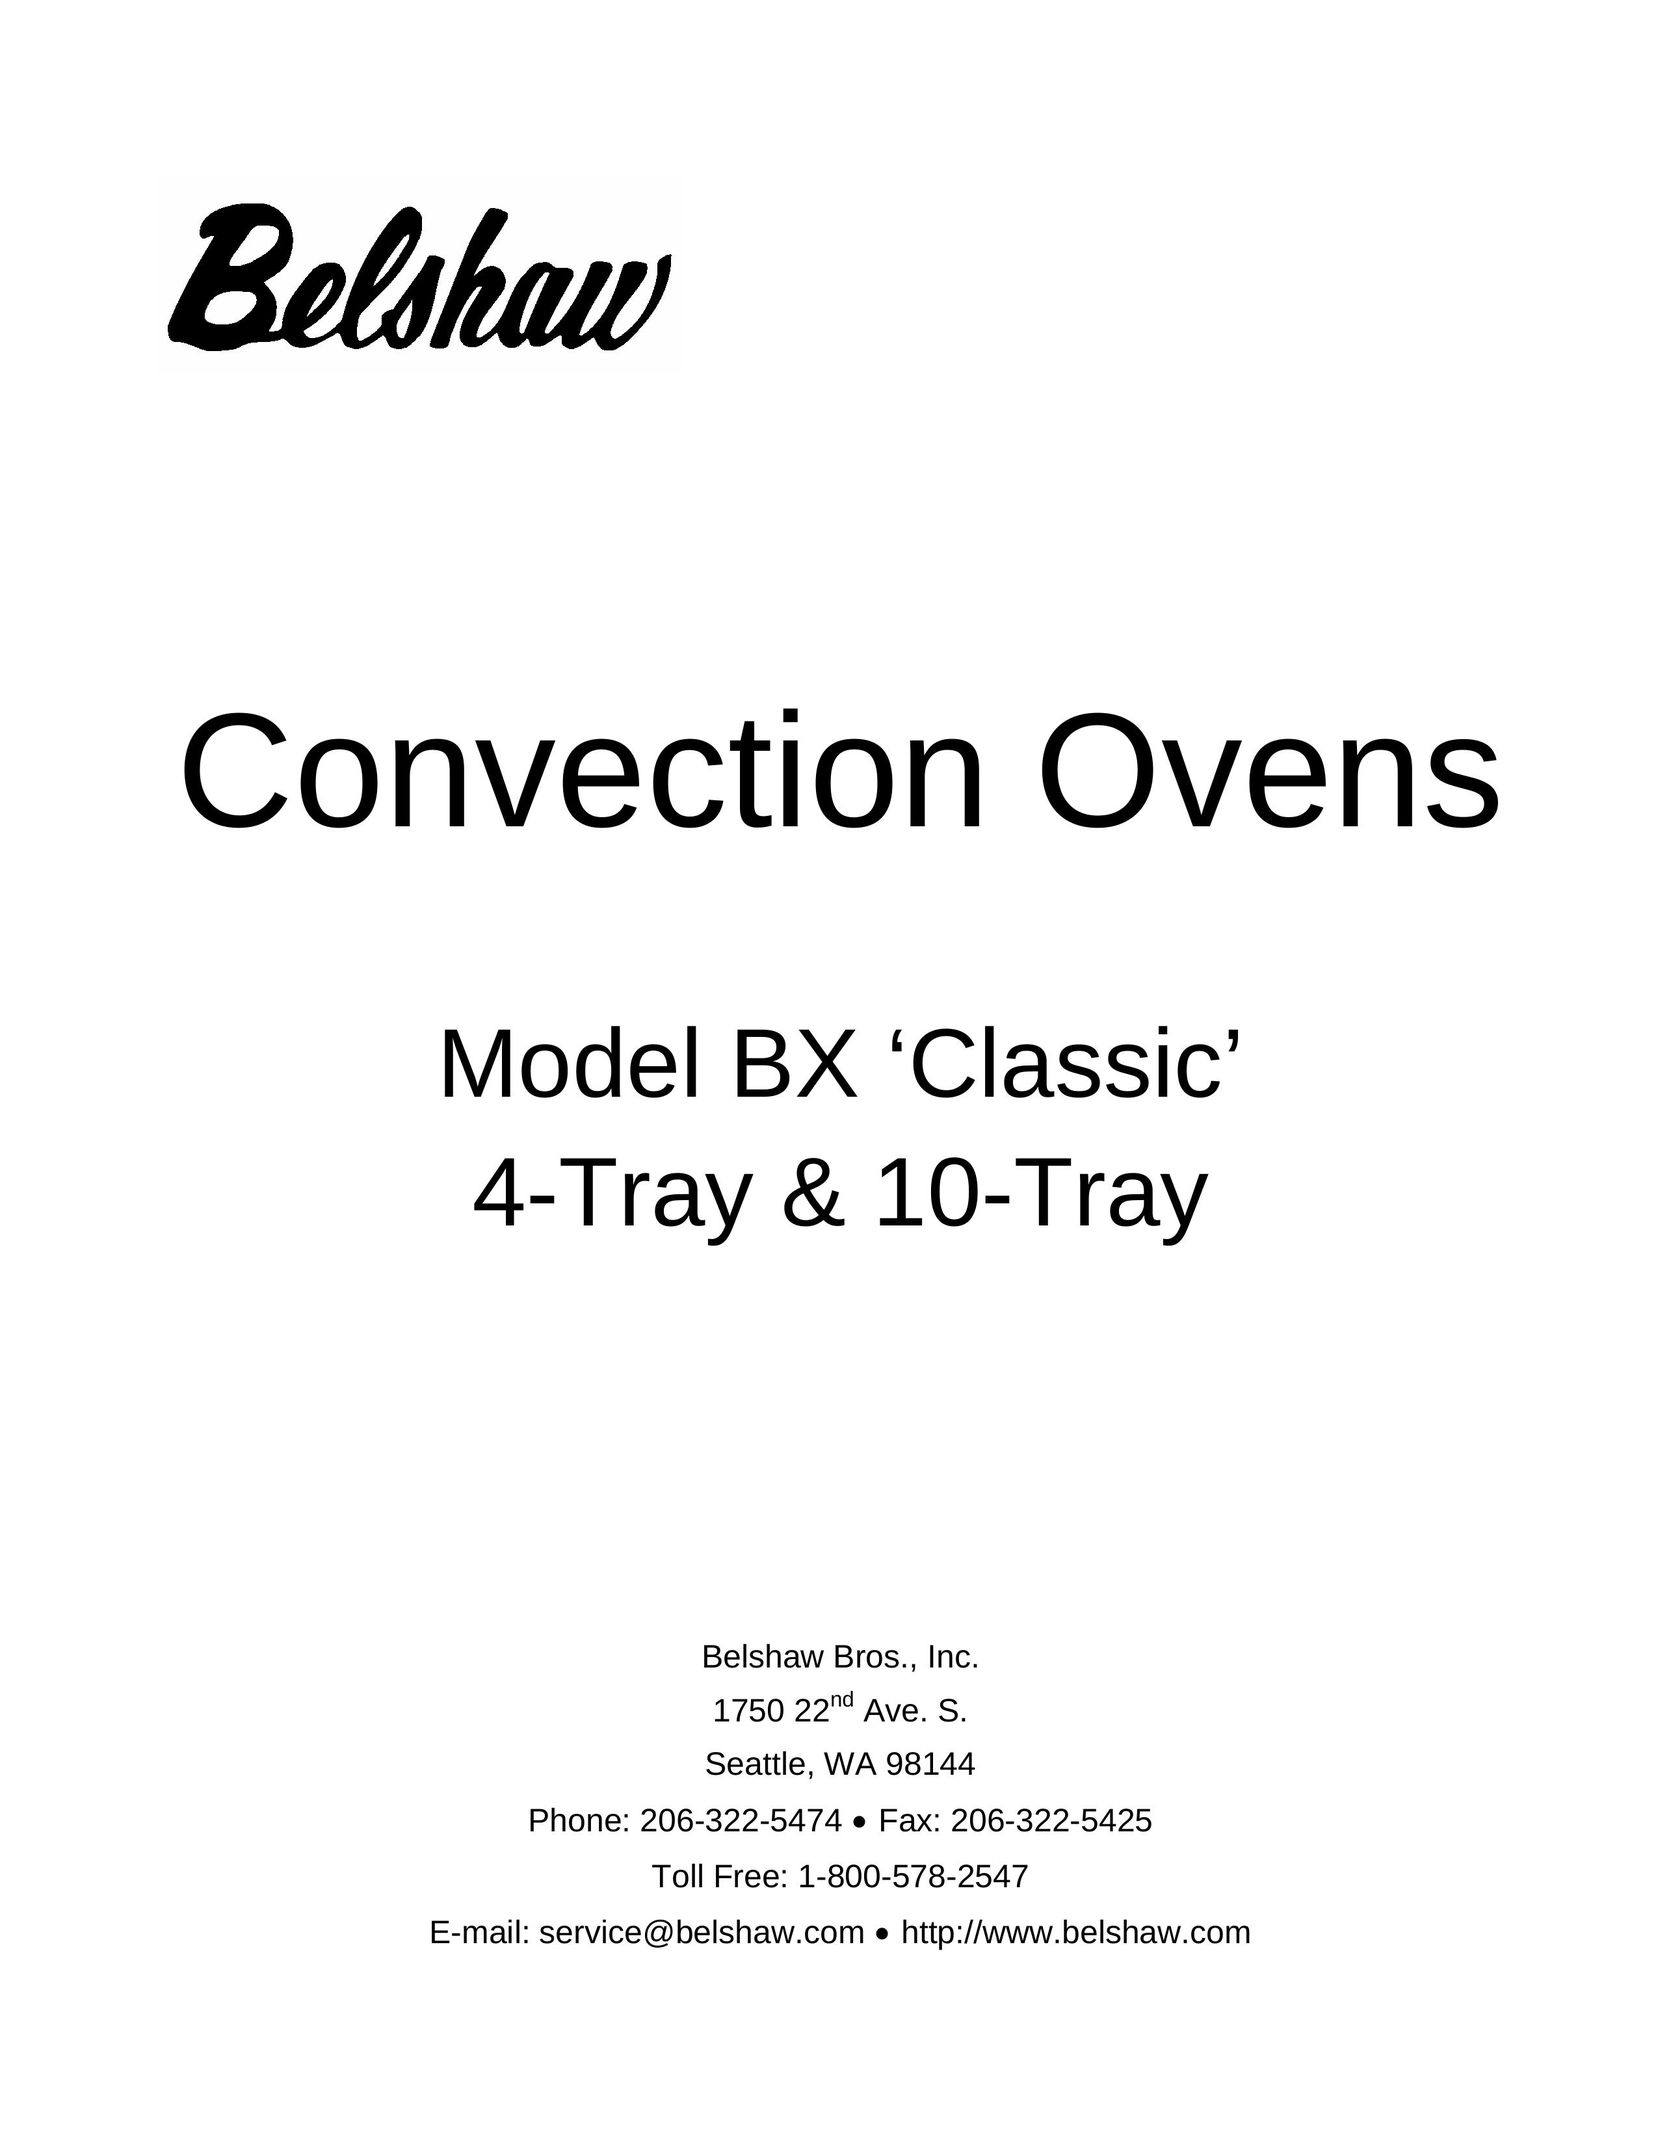 Belshaw Brothers BX Classic Convection Oven User Manual